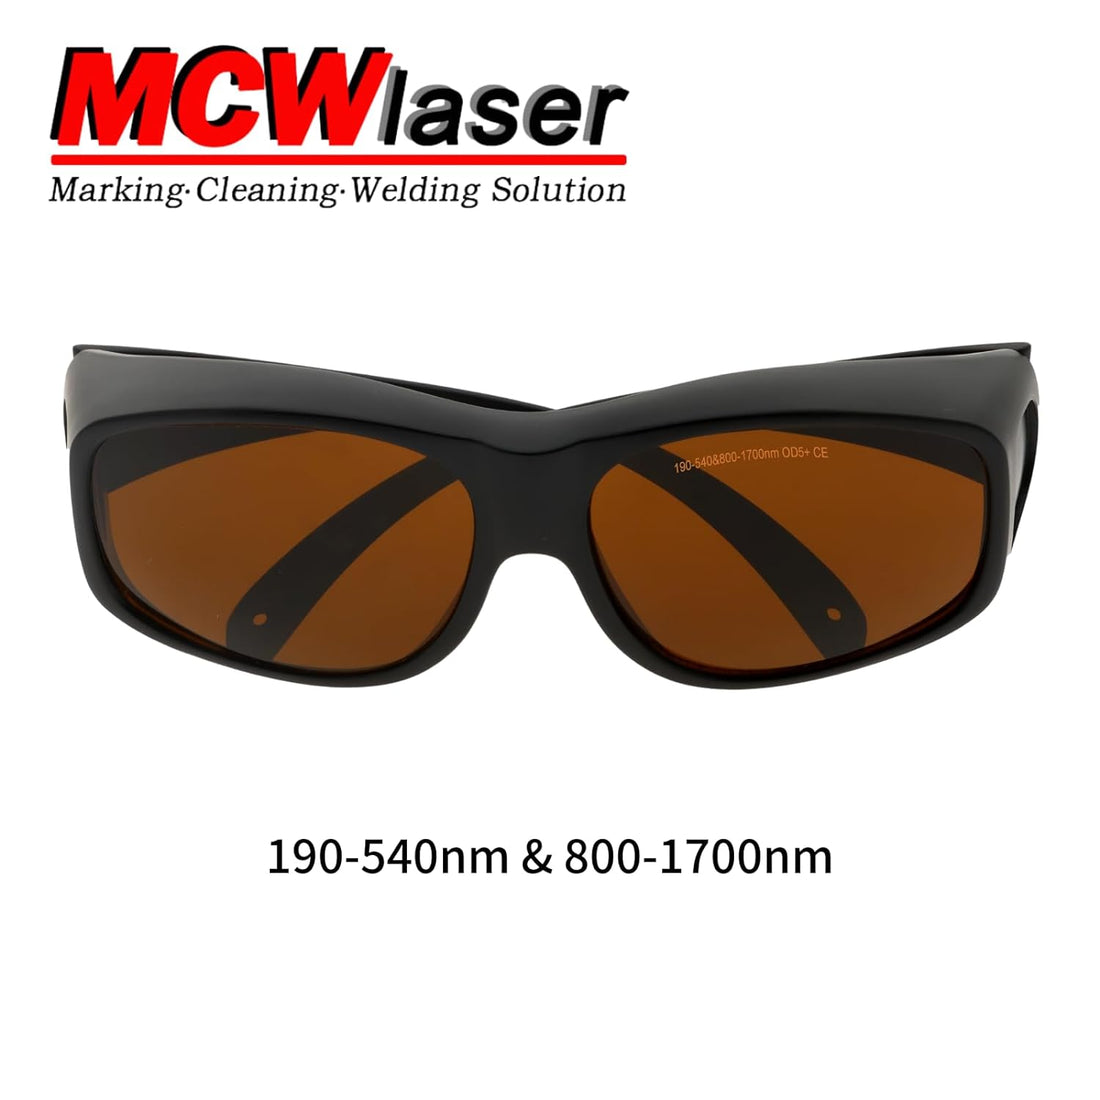 MCWlaser Laser Safty Protective Goggles Glasses For 355nm 532nm 808nm 980nm 1064nm (190-540 & 800-1700nm) Absorption Type EP-8 Eyewear For myopia EP-1